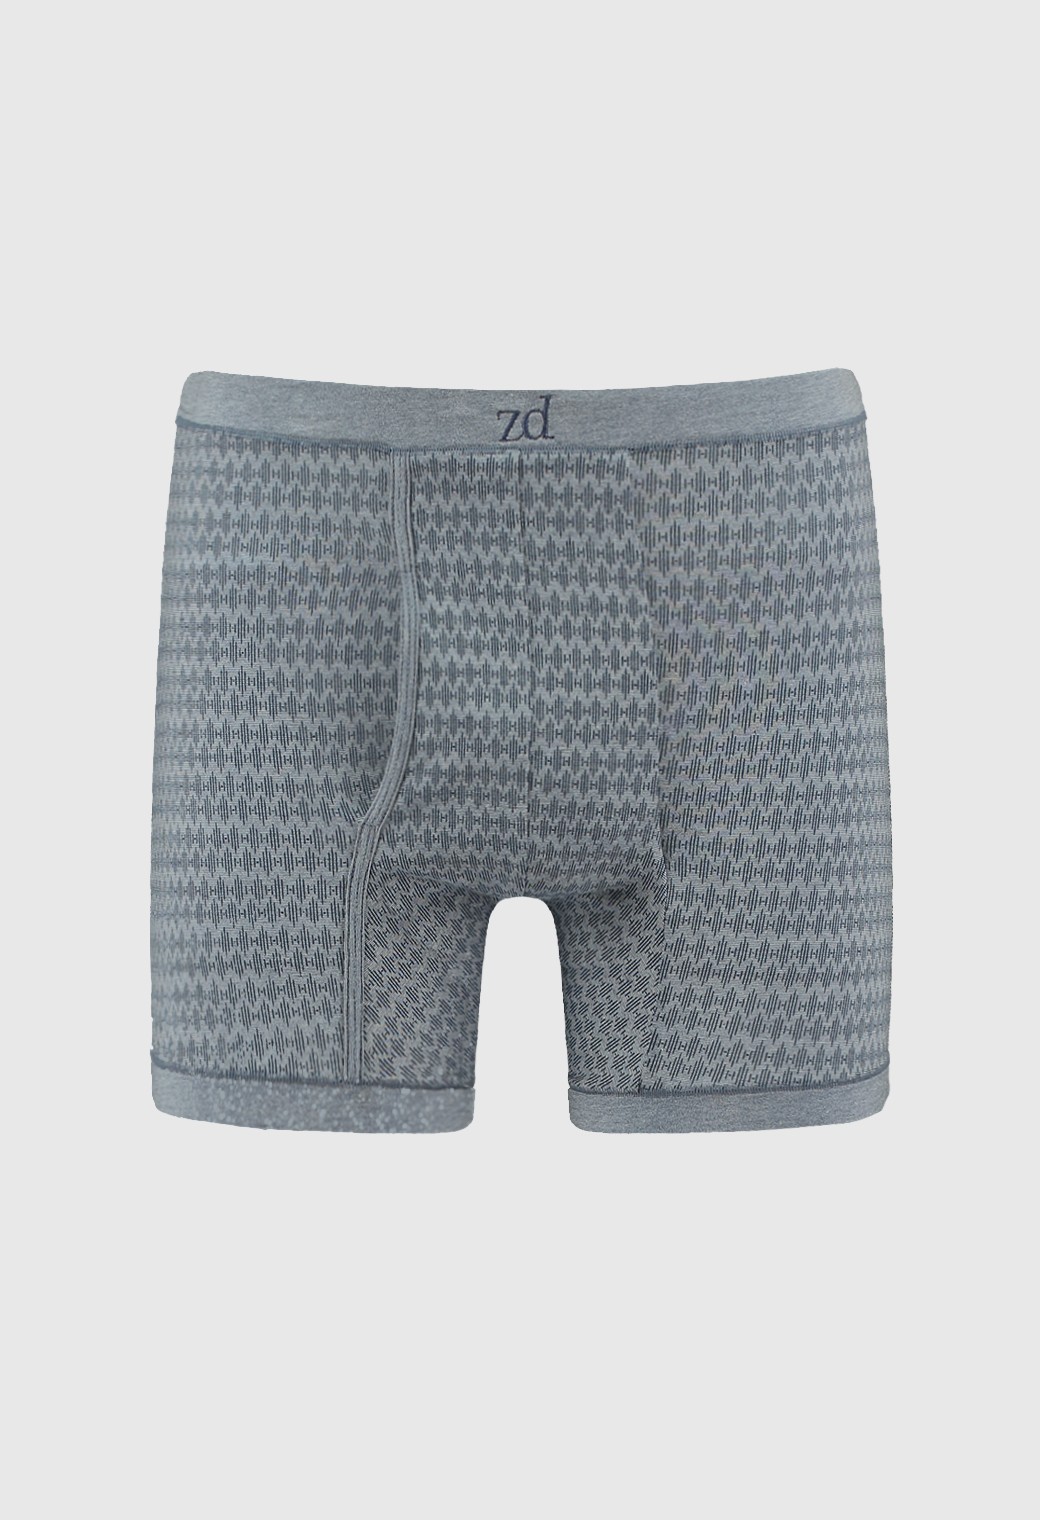 Fly Front Boxer Gentleman plus size